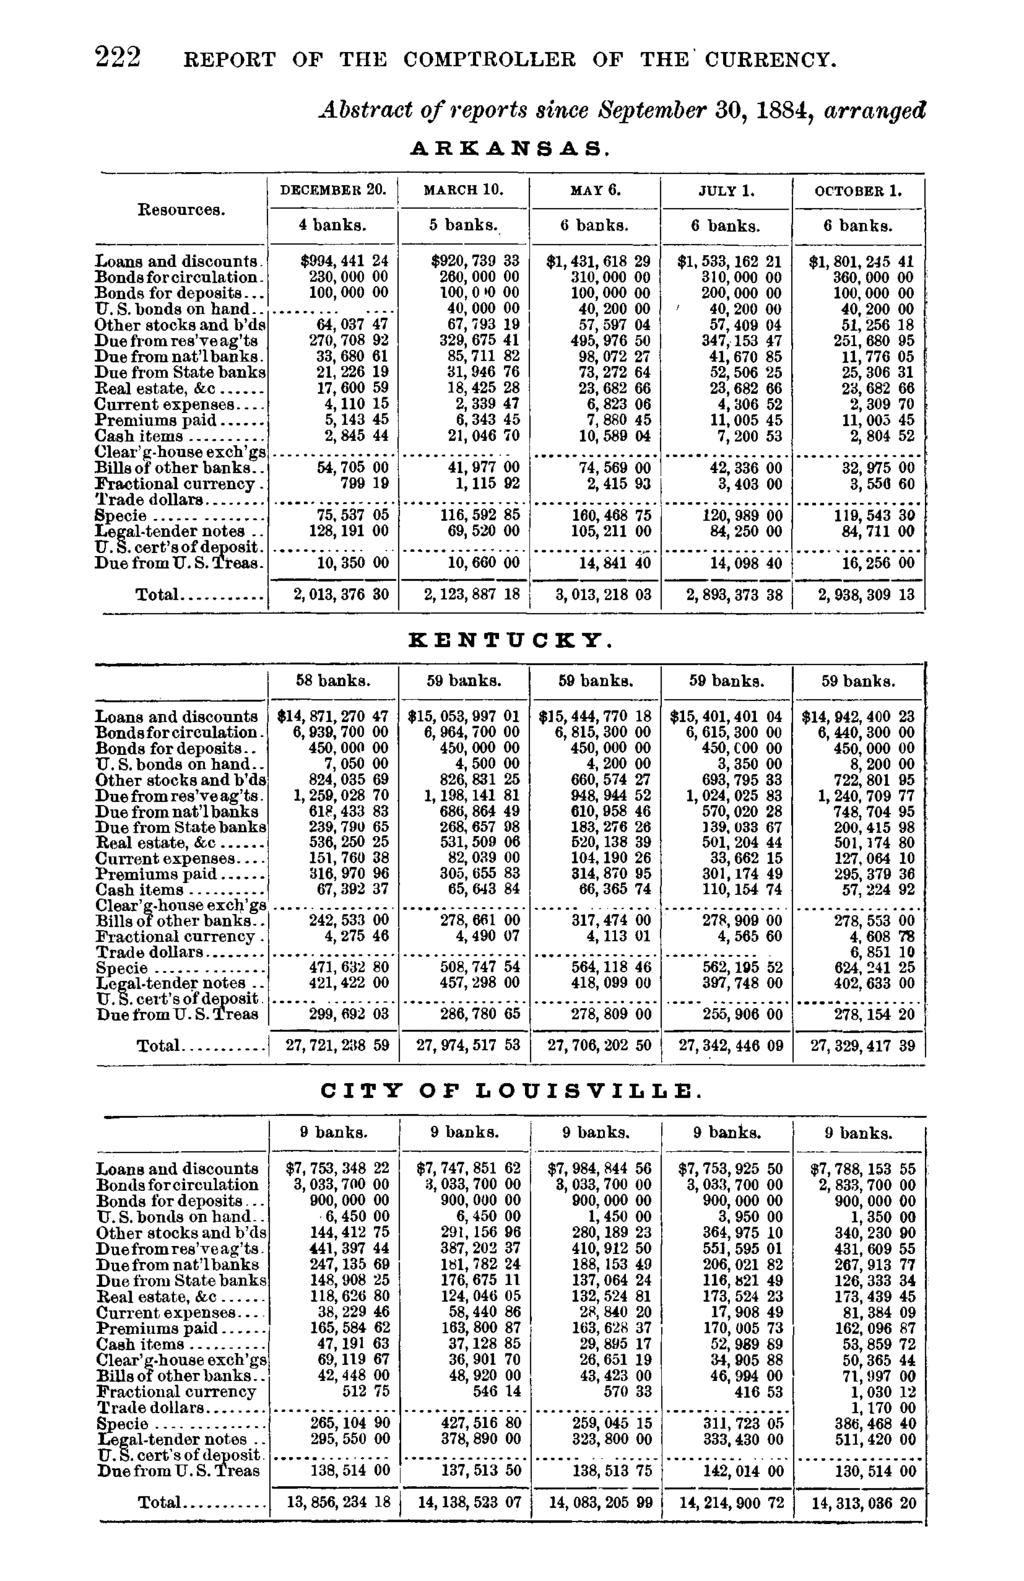 222 REPORT OF THE COMPTROLLER OF THE CURRENCY. Abstract of reports since September 30, 1884, arranged ARKANSAS. Resources. Loans and discounts. Bonds for circulation. Bonds for deposits.